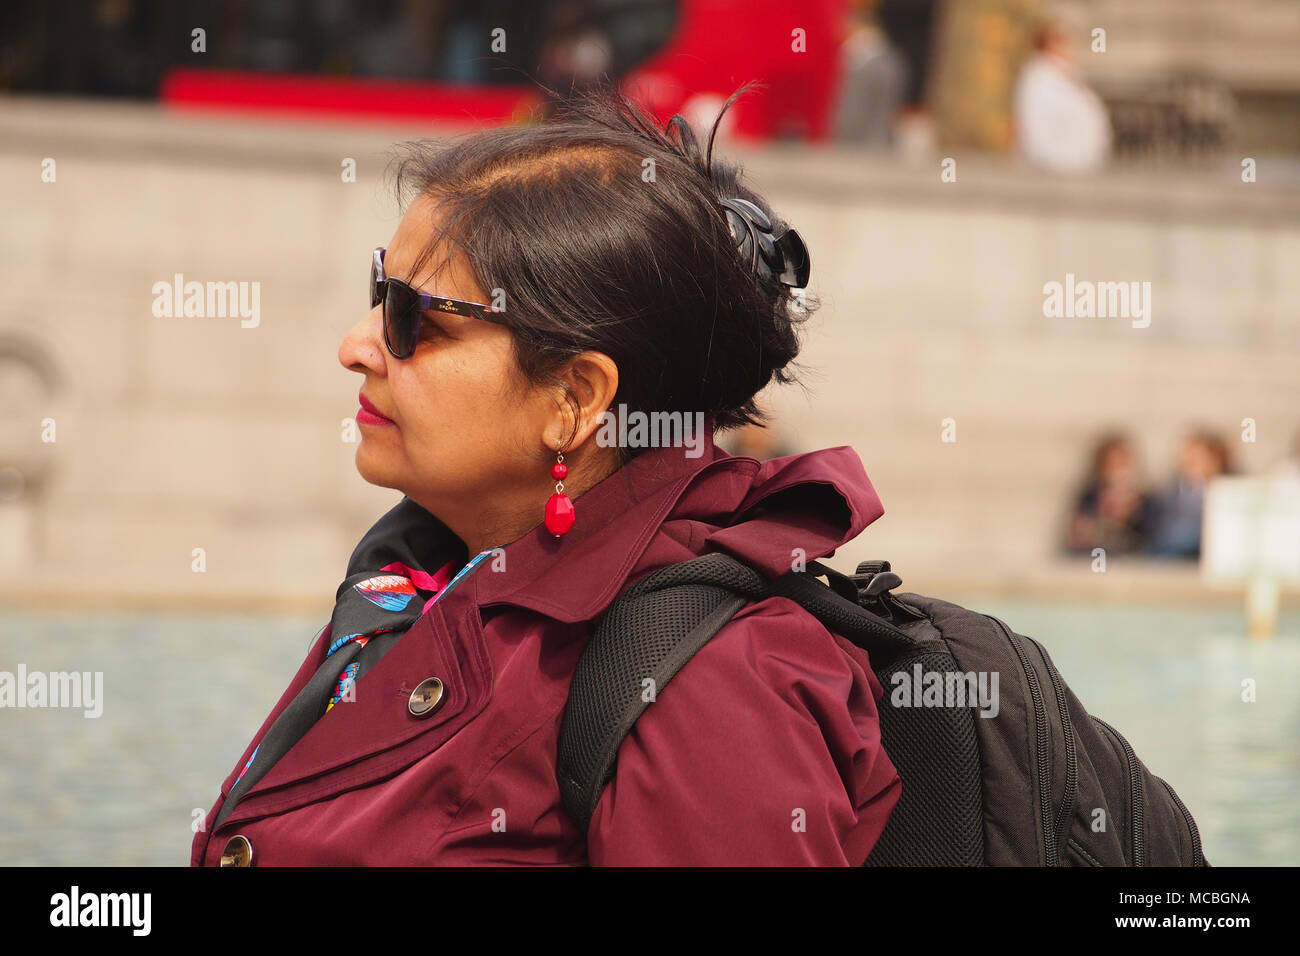 A woman sightseer in Trafalgar Square, London, taking in the sights on a bright winters day by the fountains Stock Photo